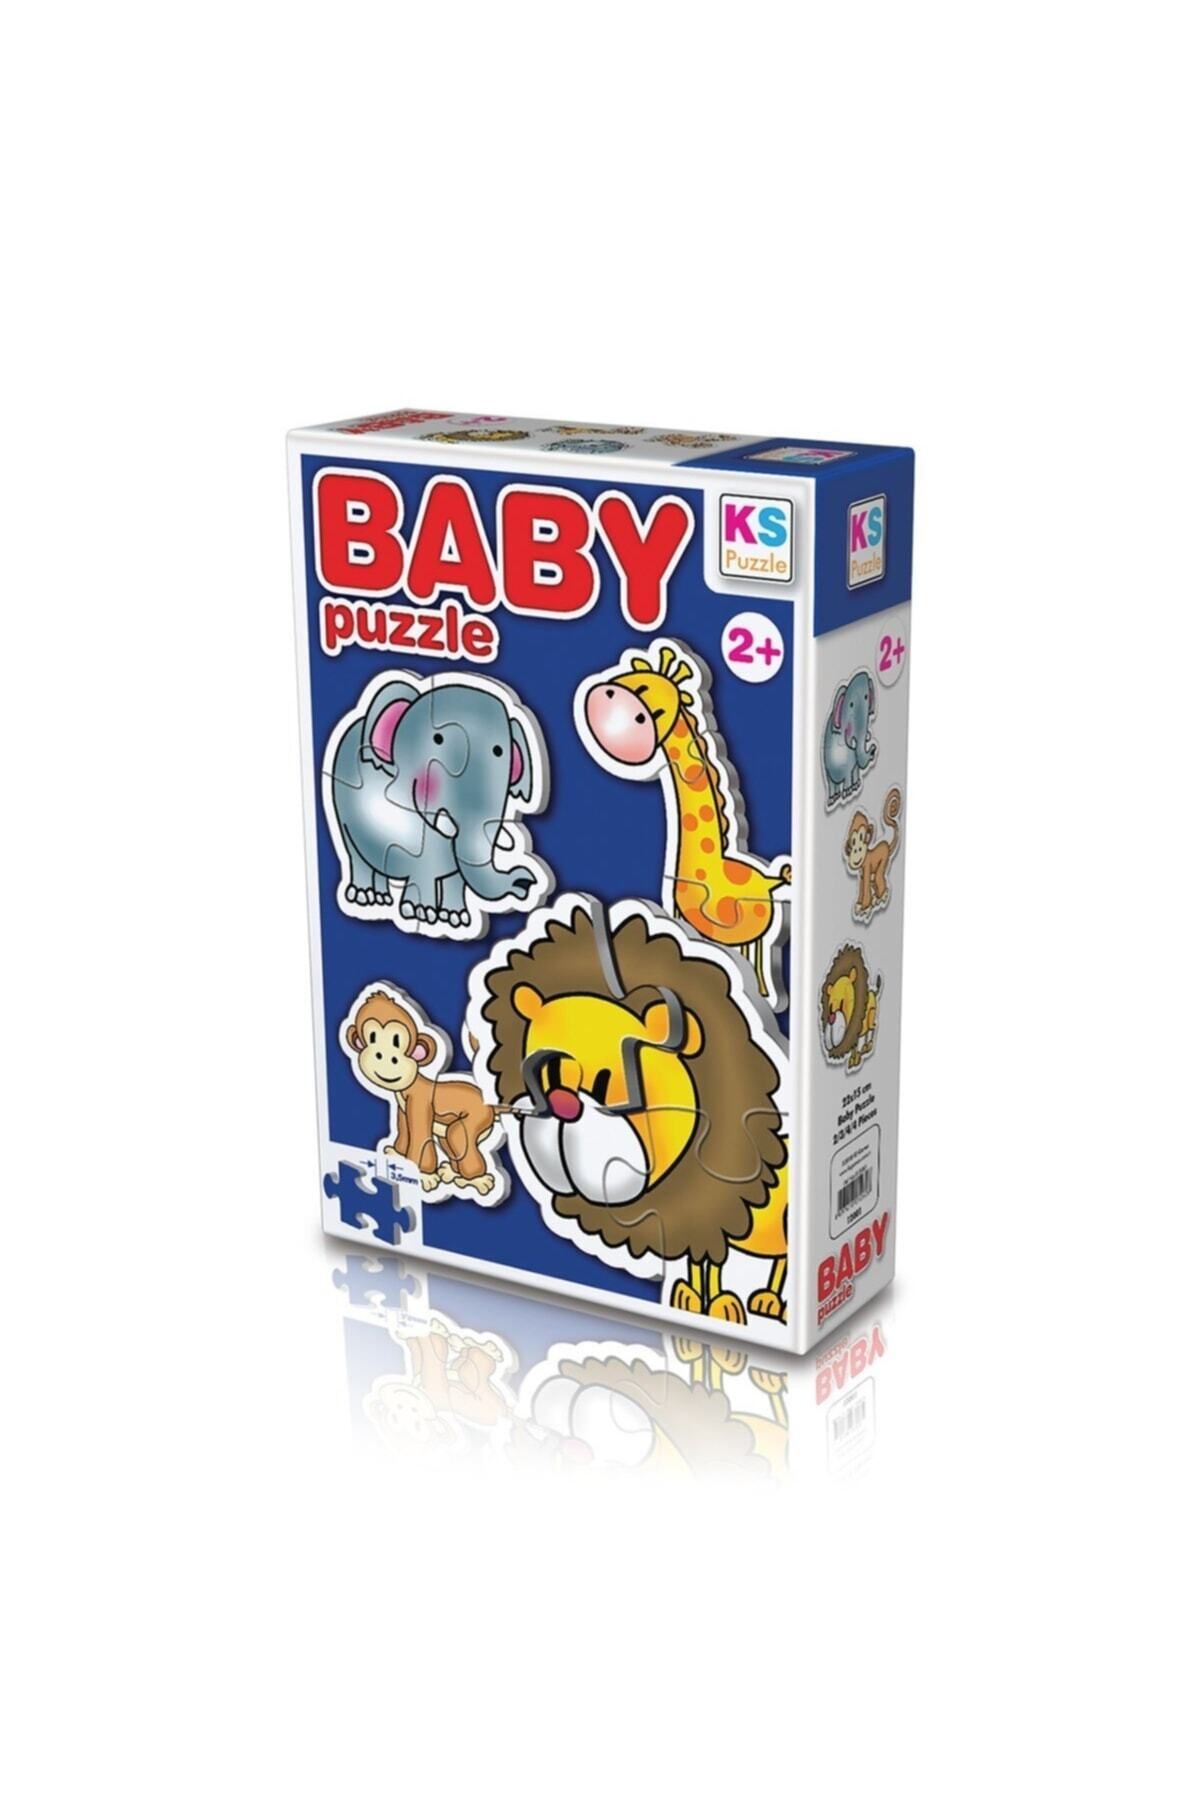 TWOX 12001 Ks, Baby Puzzle Jungle